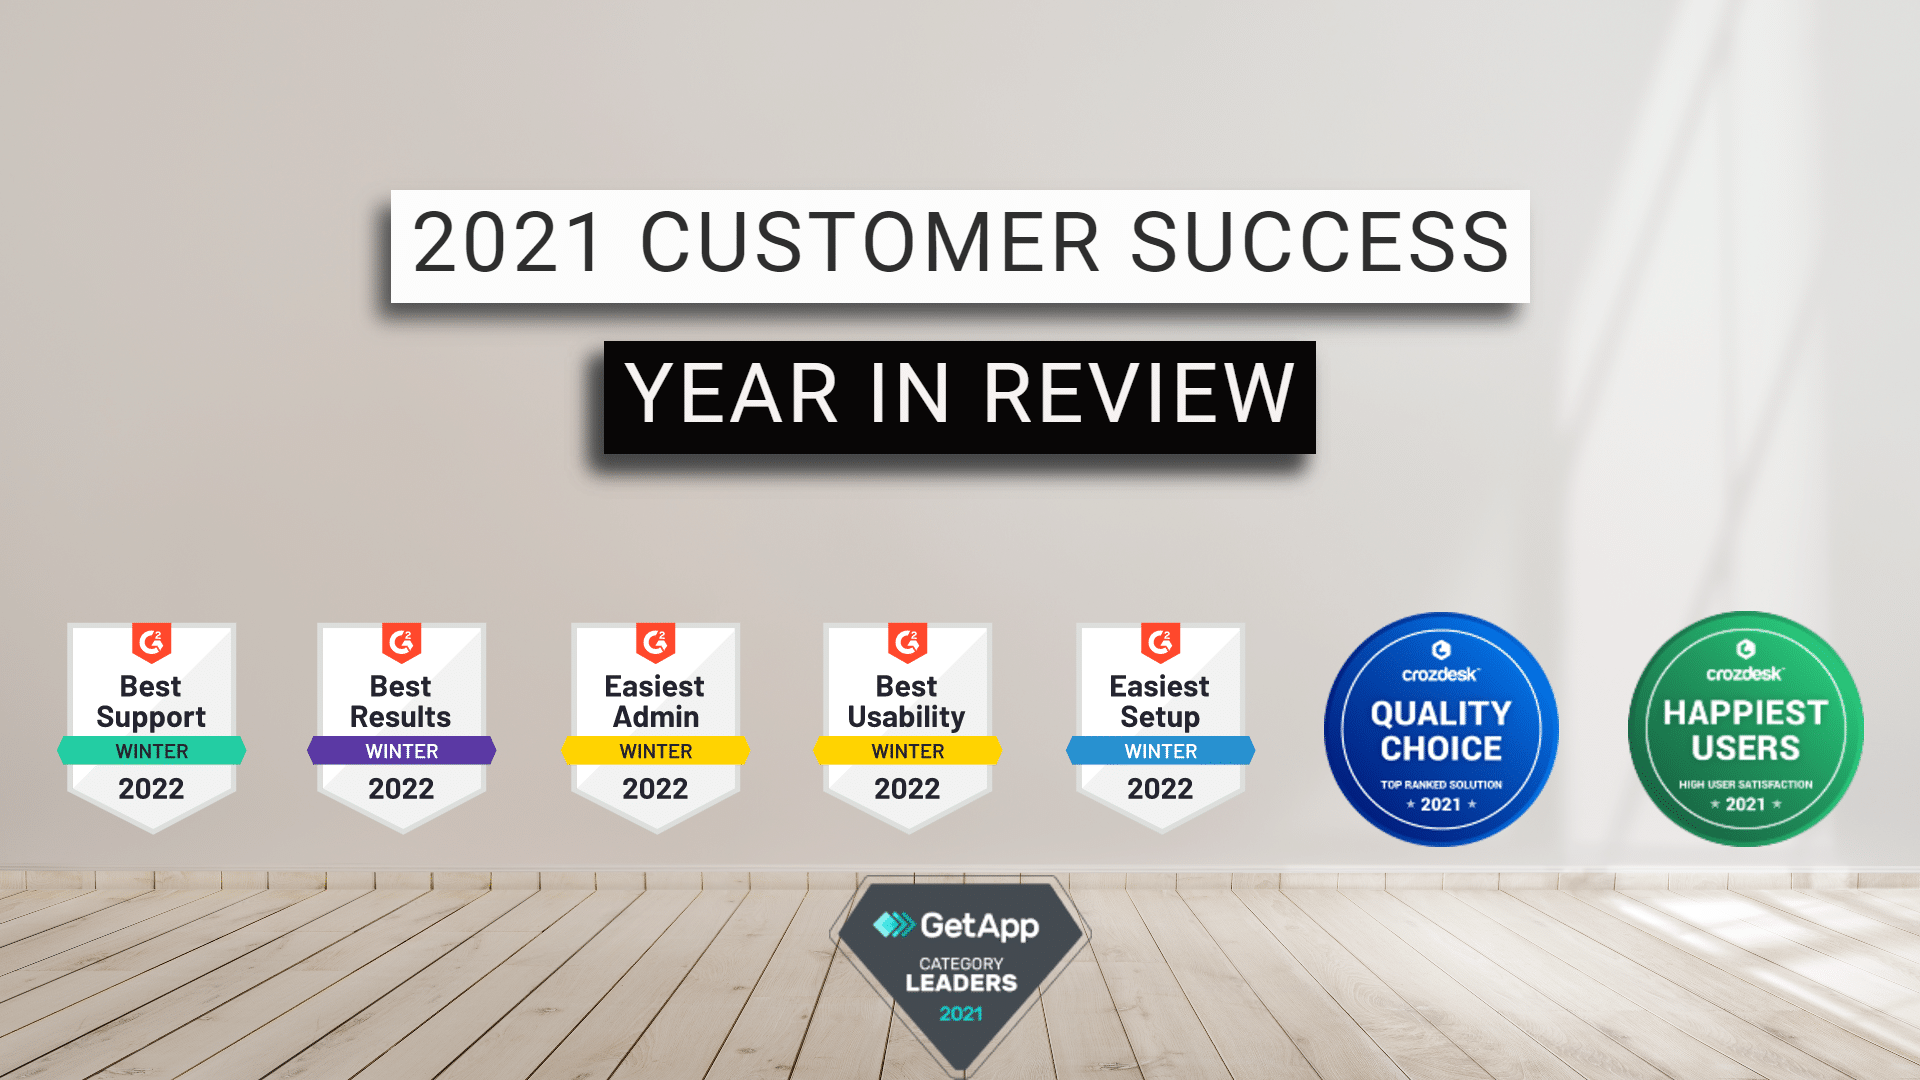 2021 Customer Success Year in Review – Best News, Resources & Trends